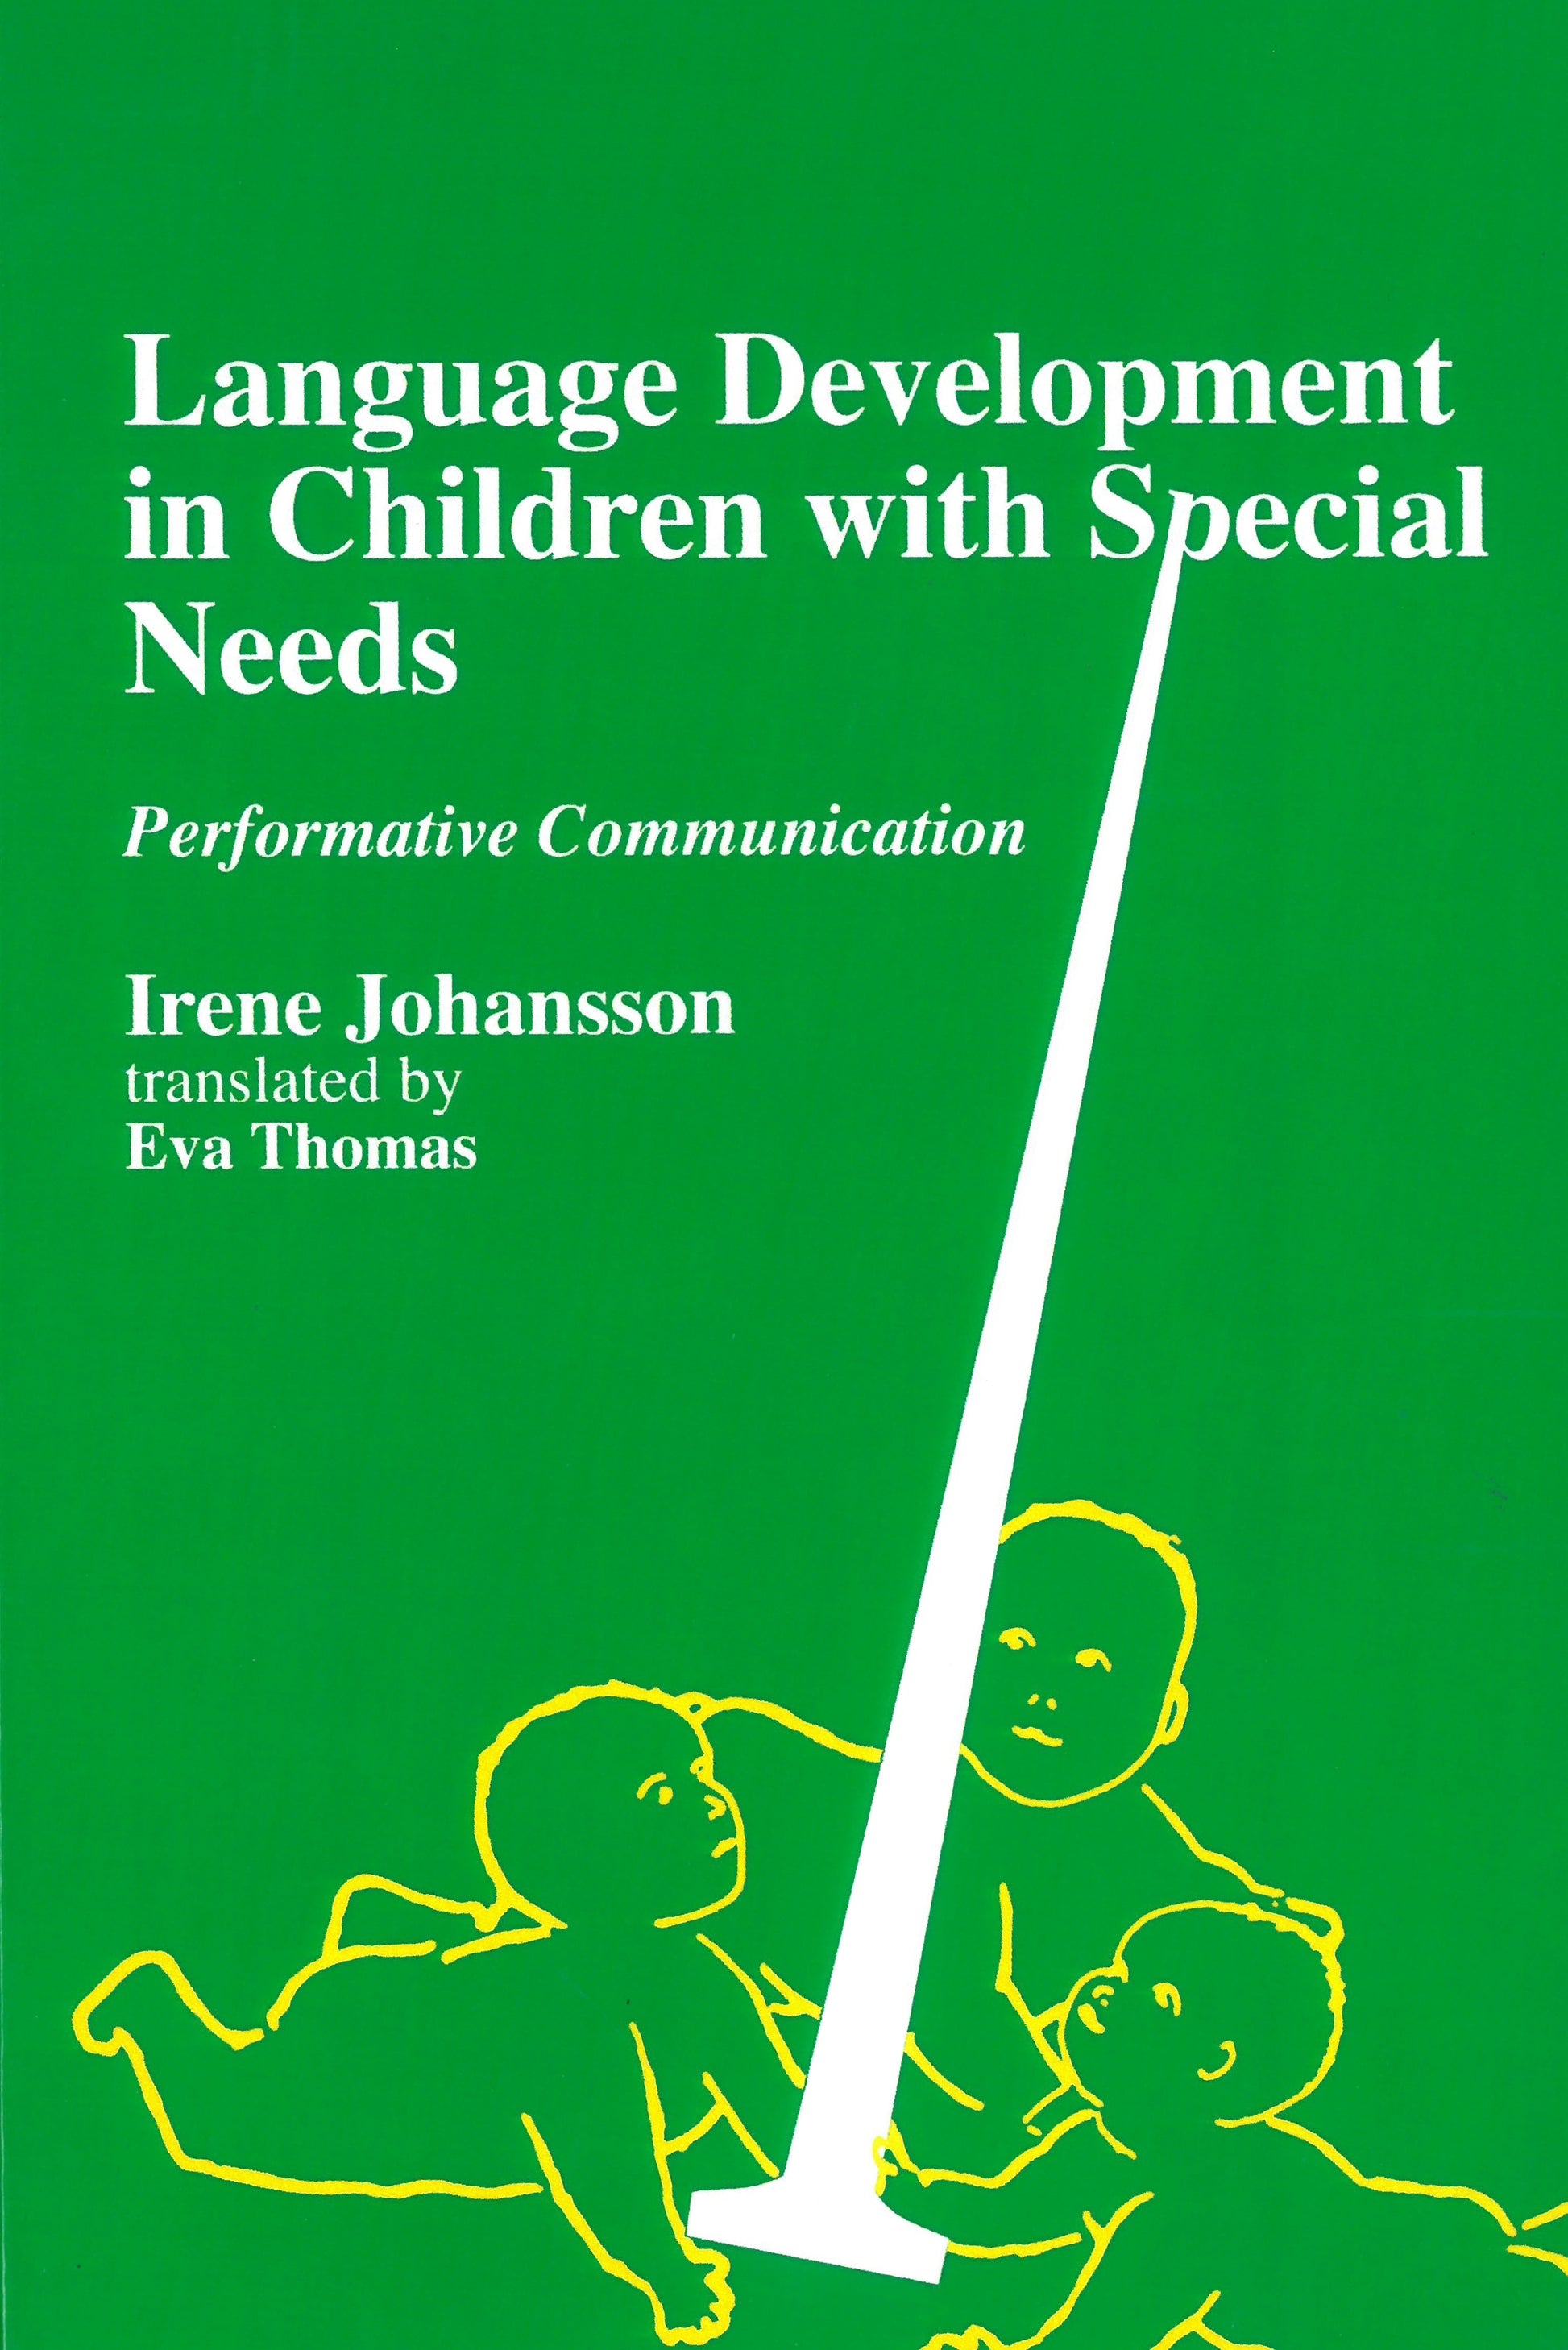 Language Development in Children with Disability and Special Needs by Irene Johansson, Irene Johansson